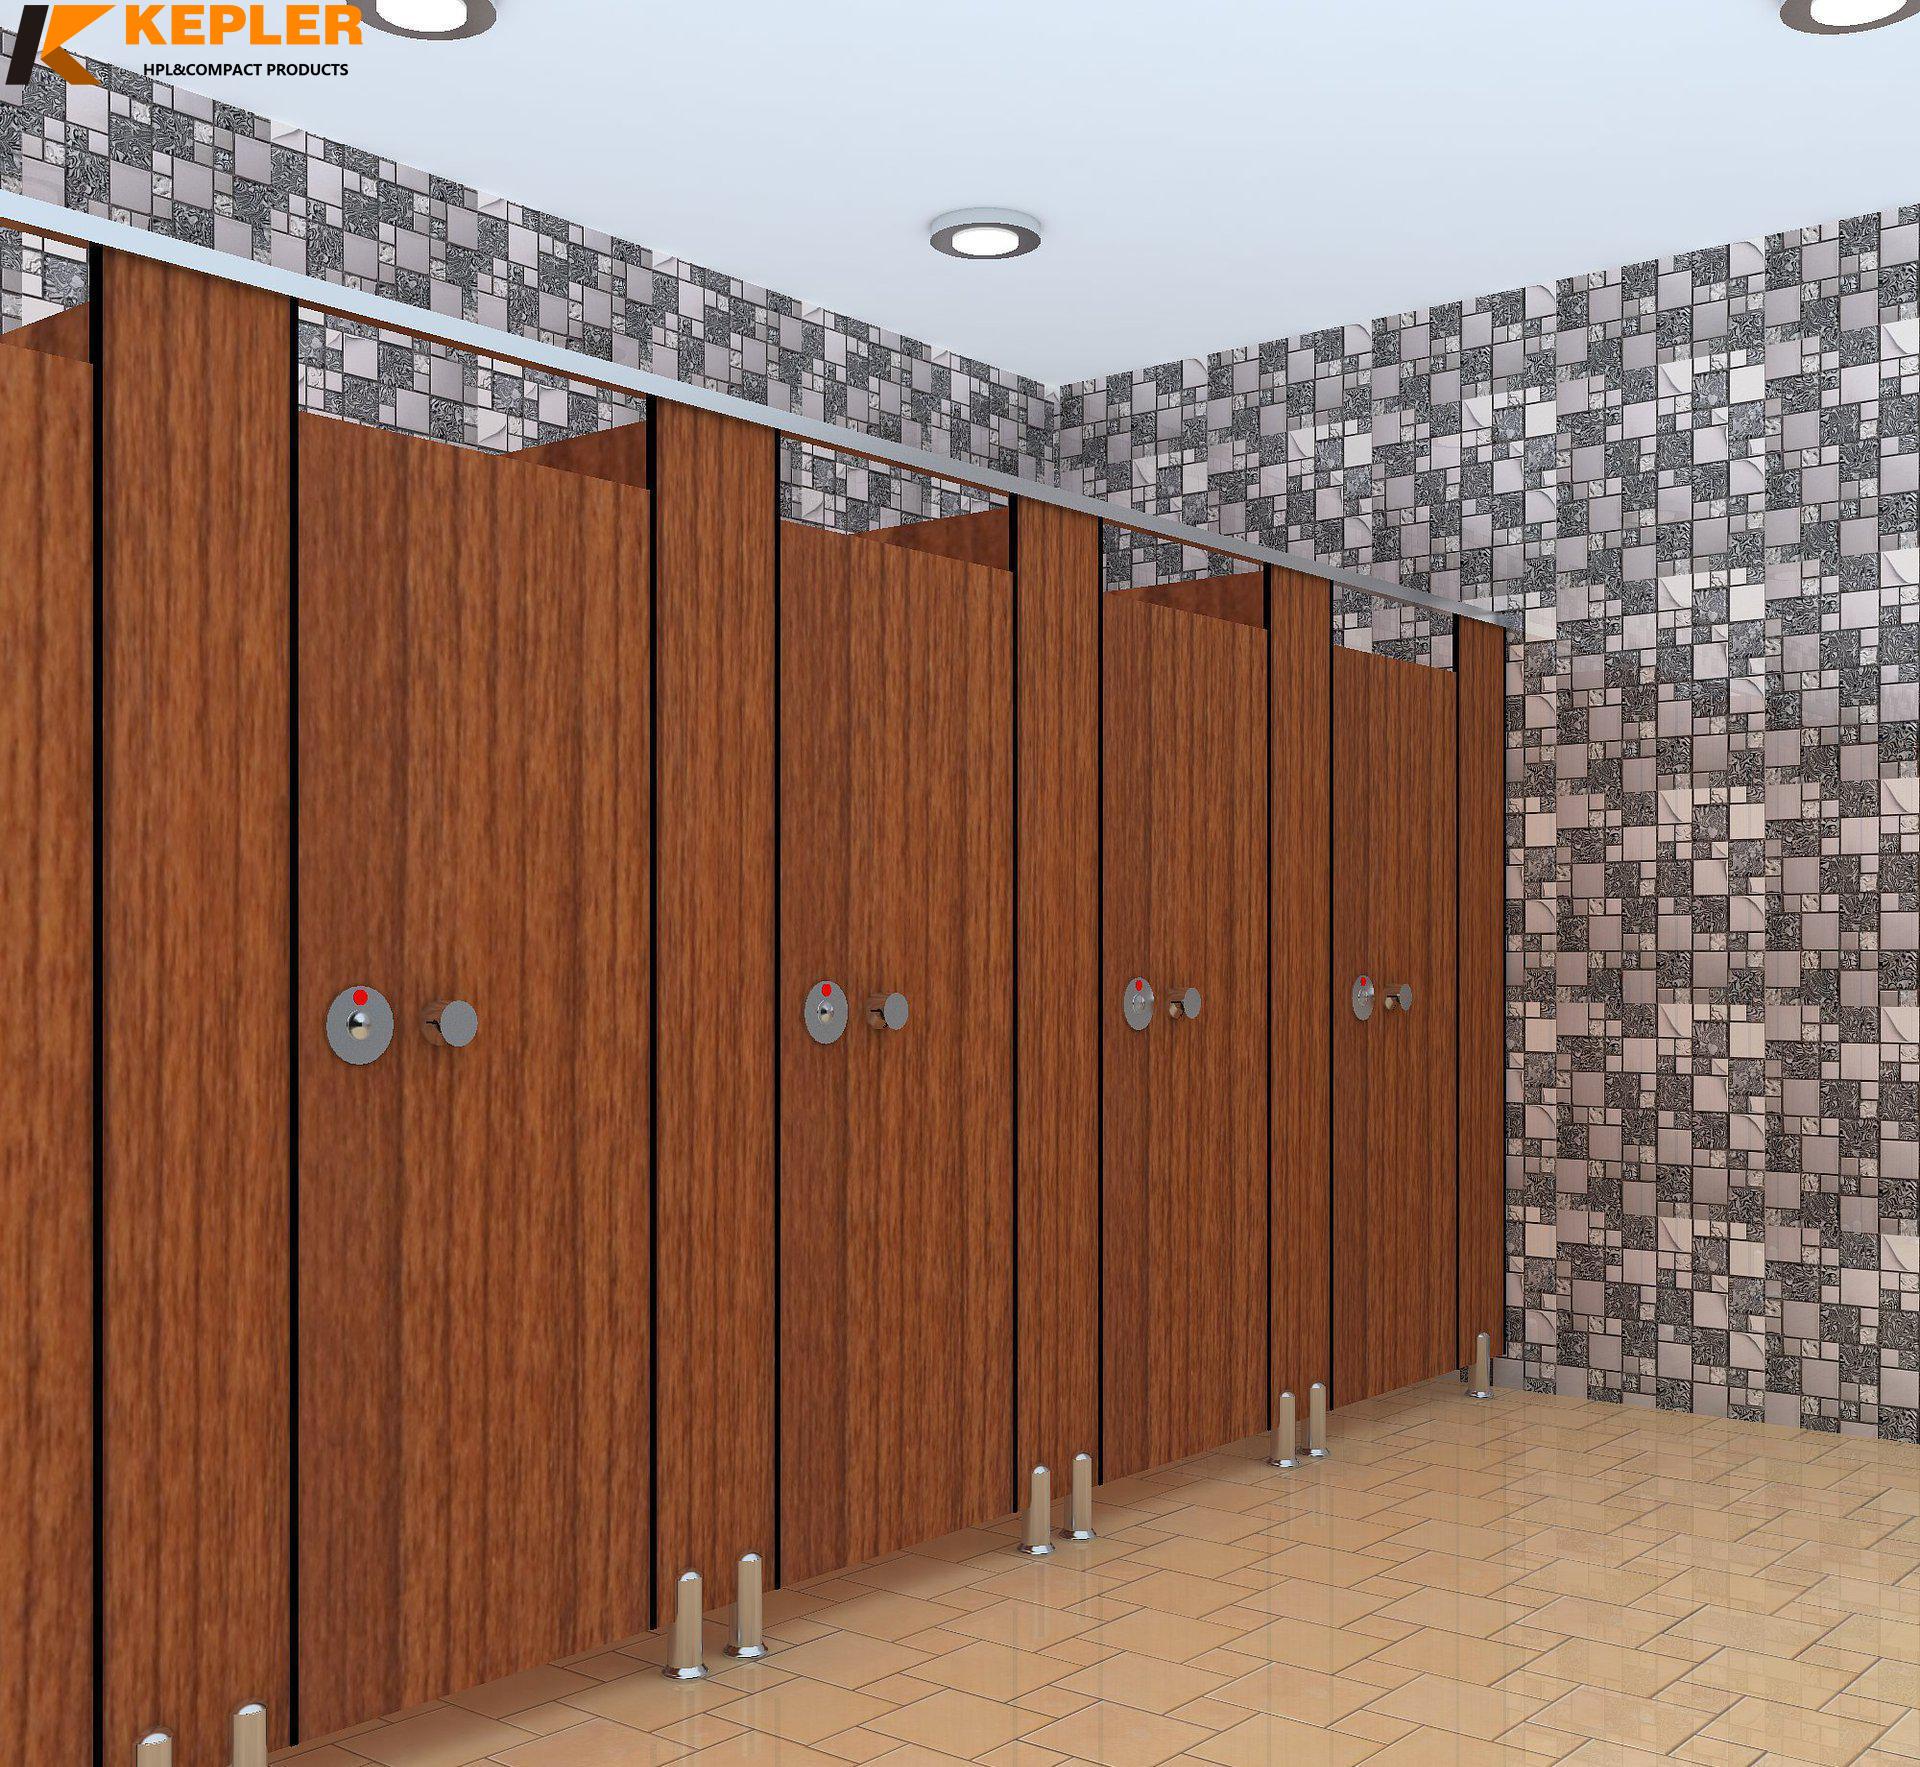 Kepler public used waterproof phenolic hpl compact laminate toilet cubicle partition panel in China